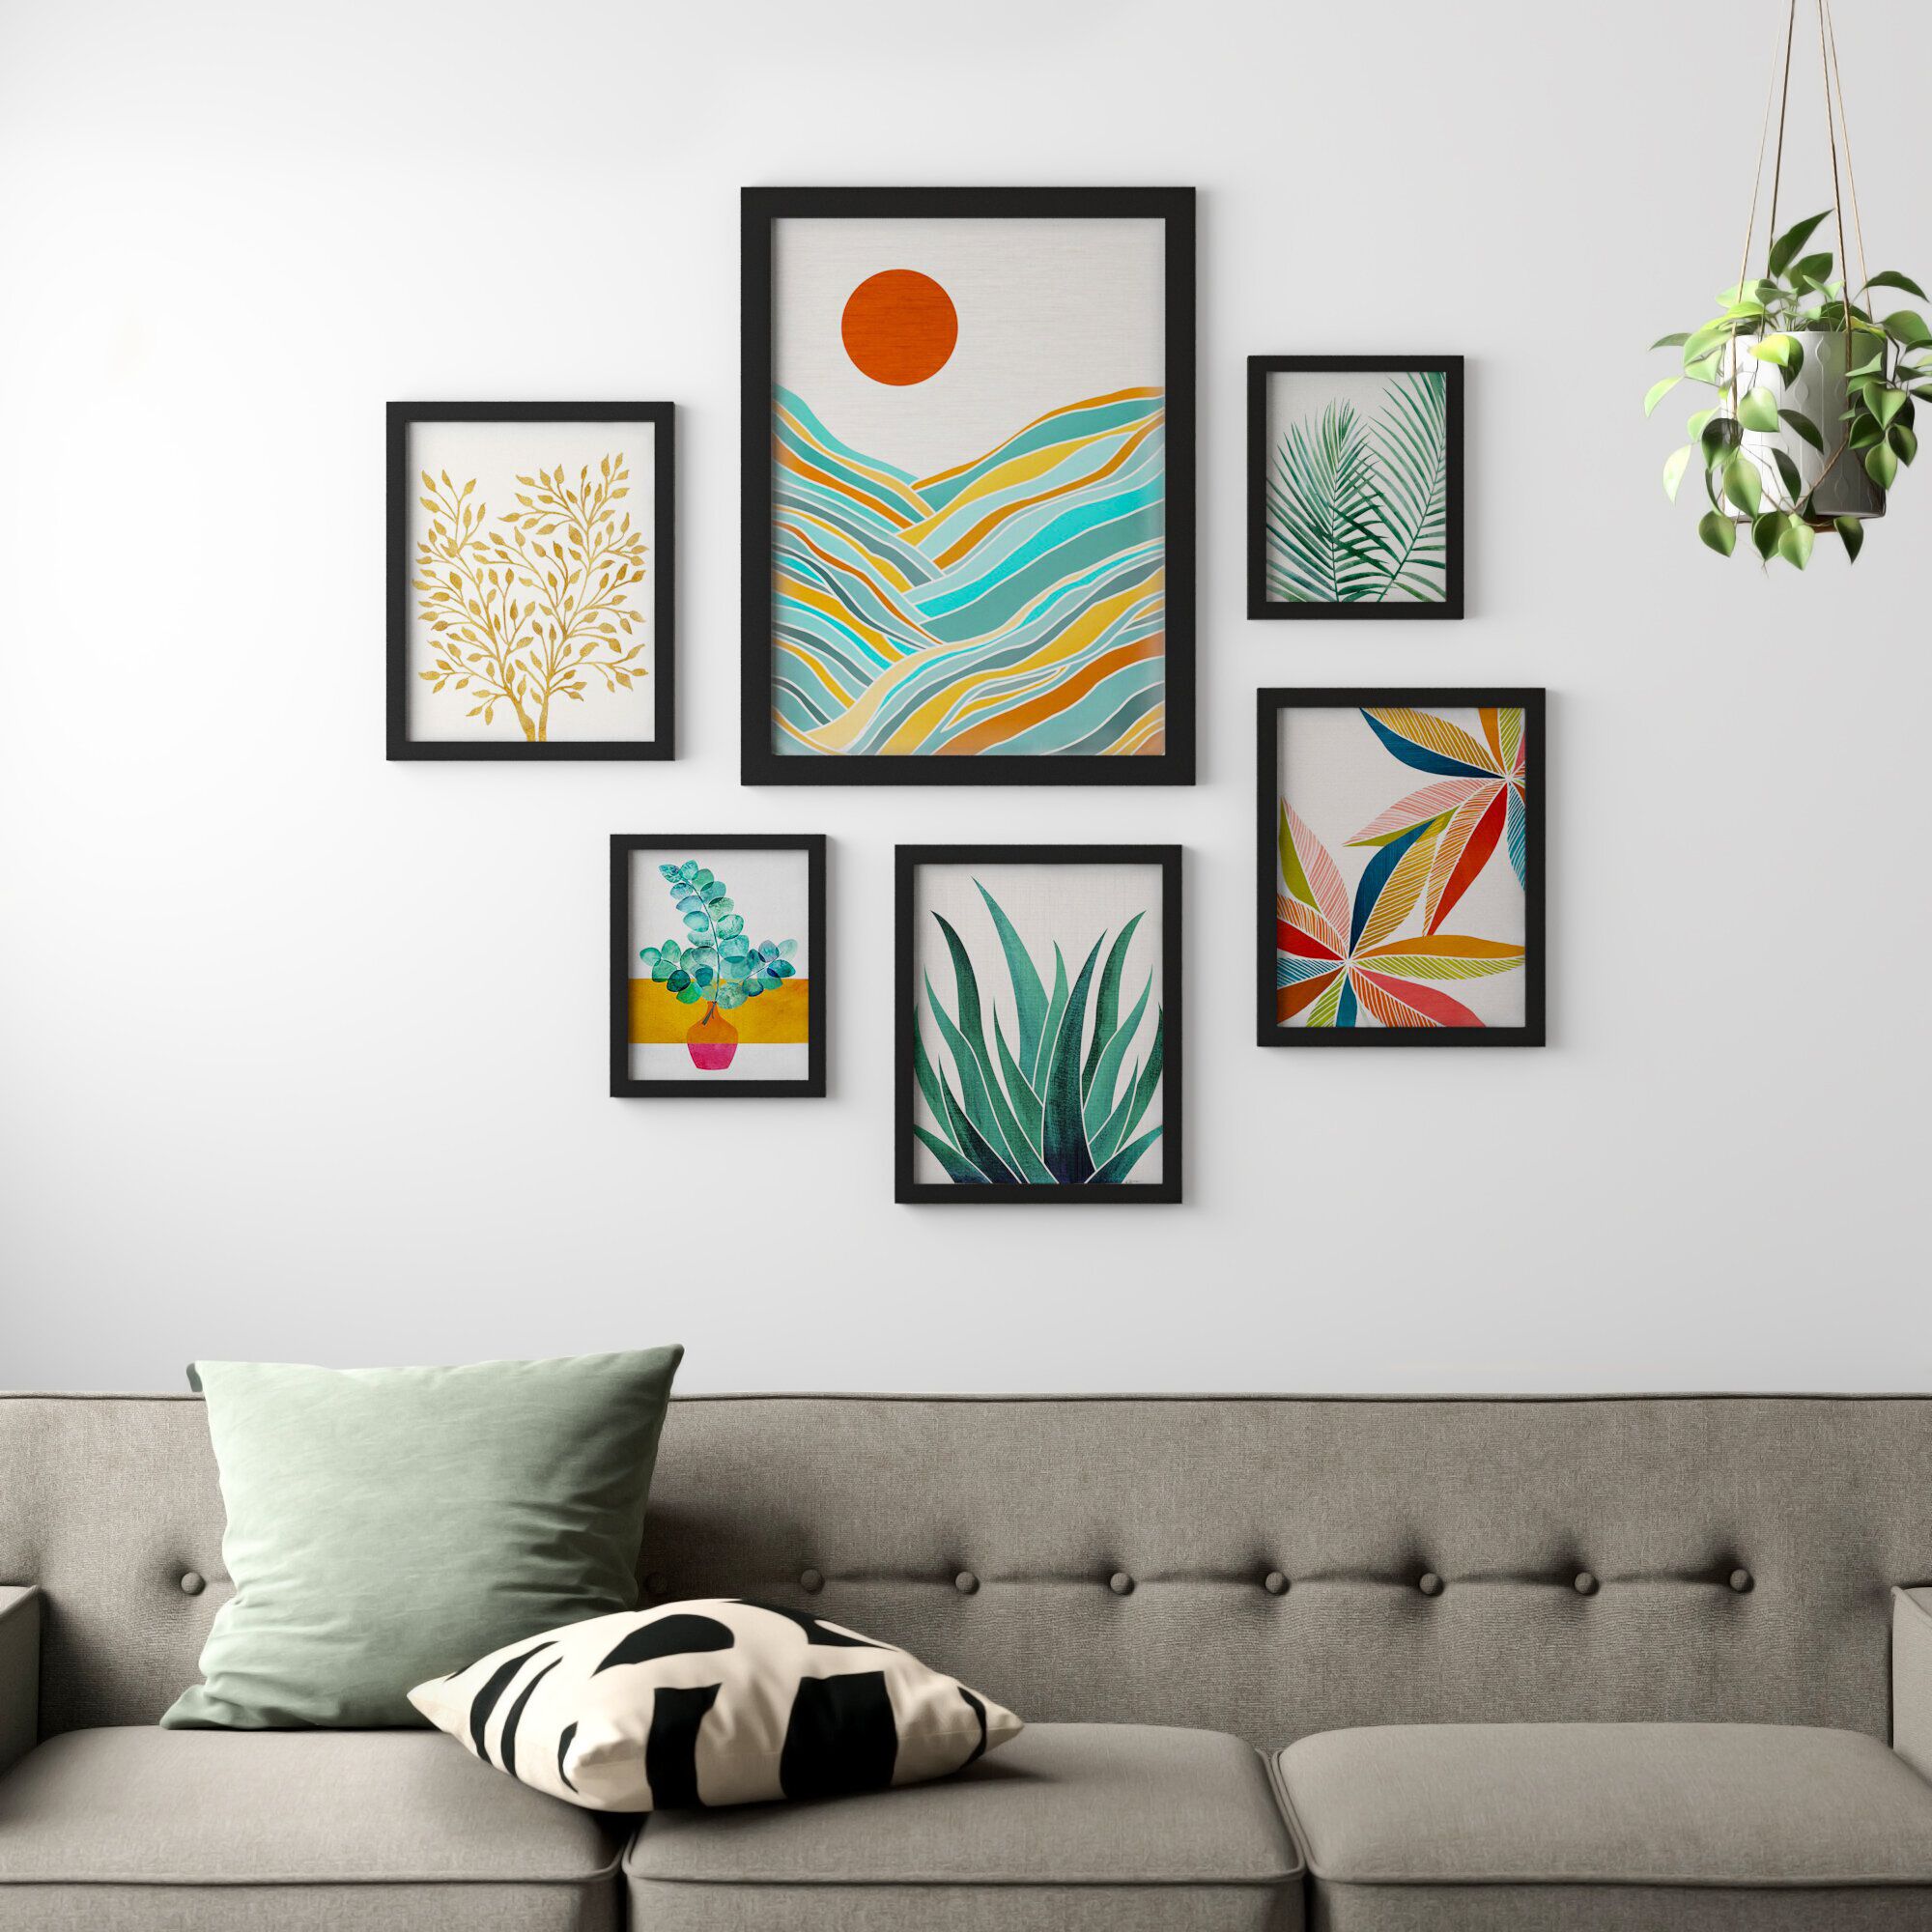 Wayfair | Tropical Wall Art You'Ll Love In 2022 Pertaining To Tropical Evening Wall Art (View 14 of 15)